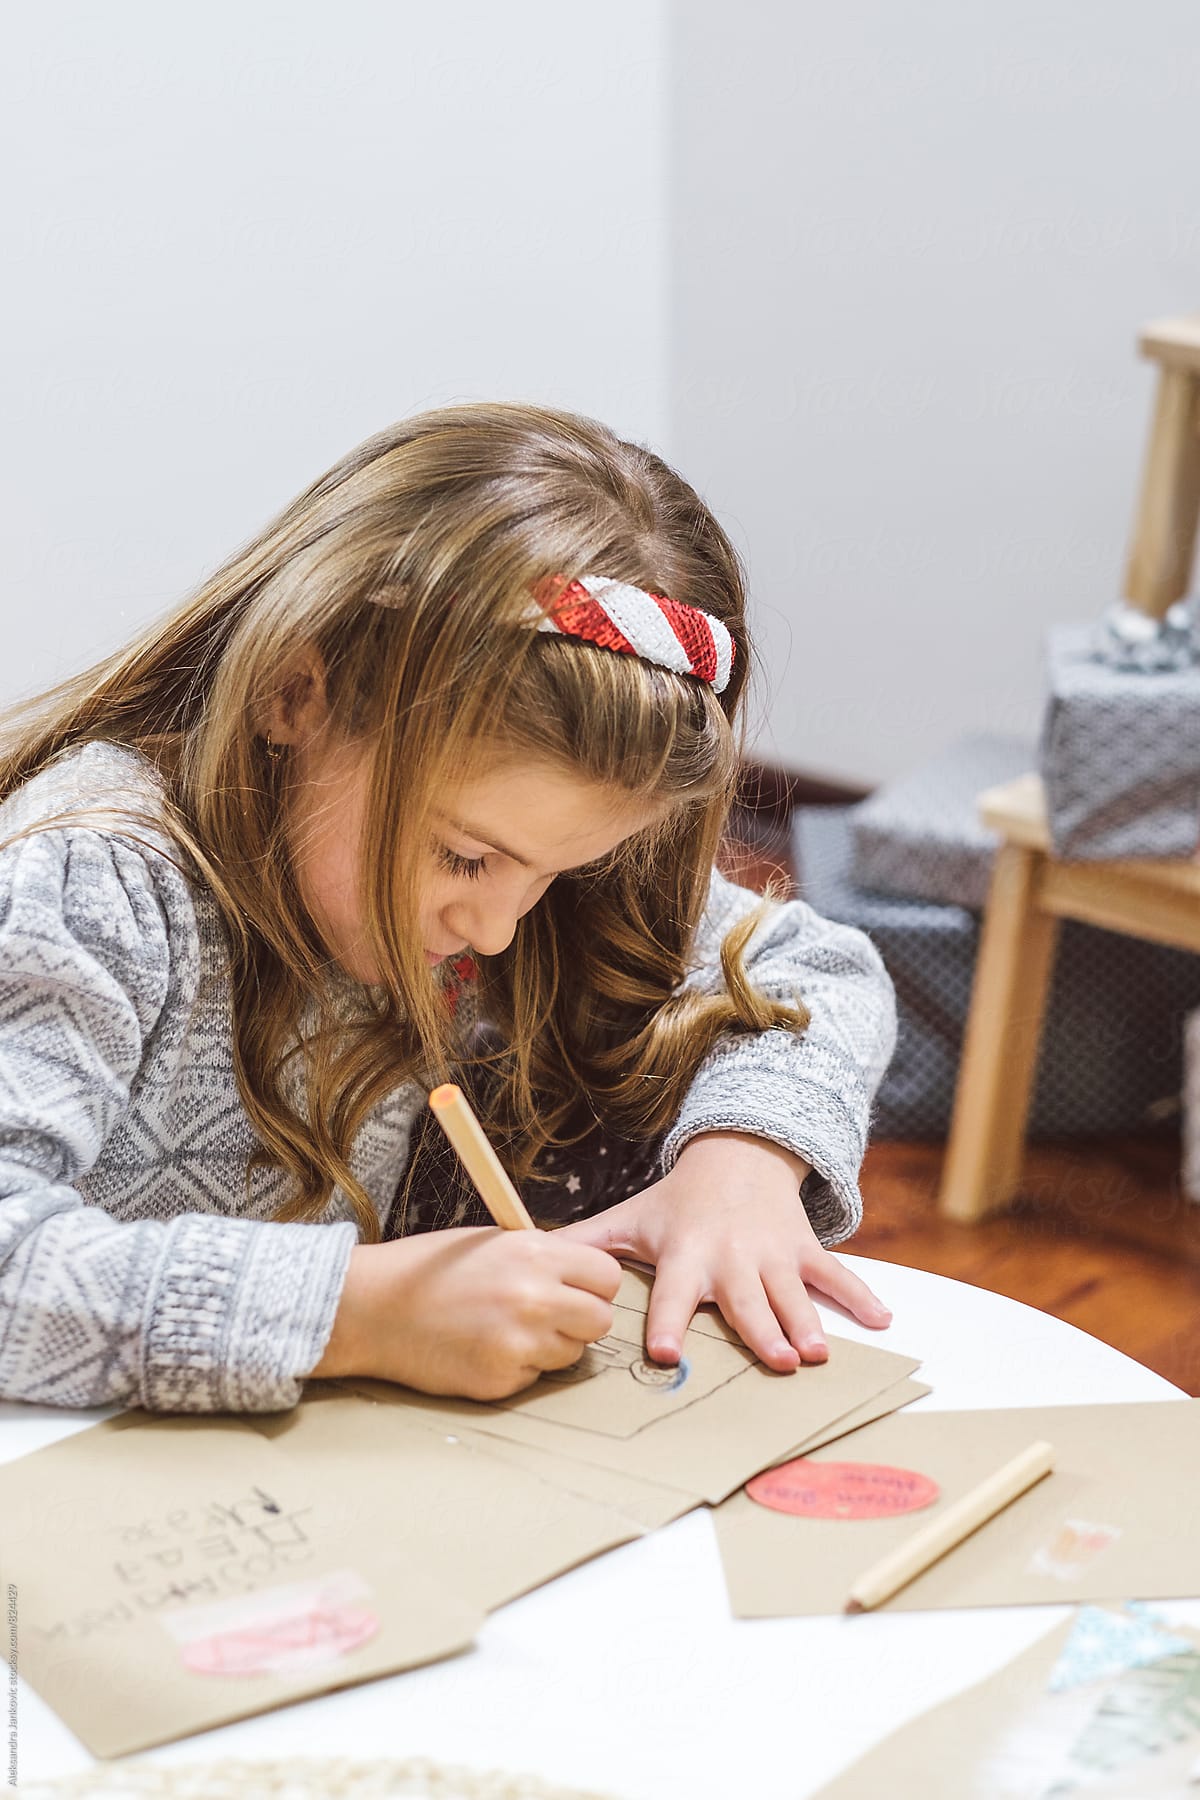 Toddler Drawing Homemade Christmas Cards